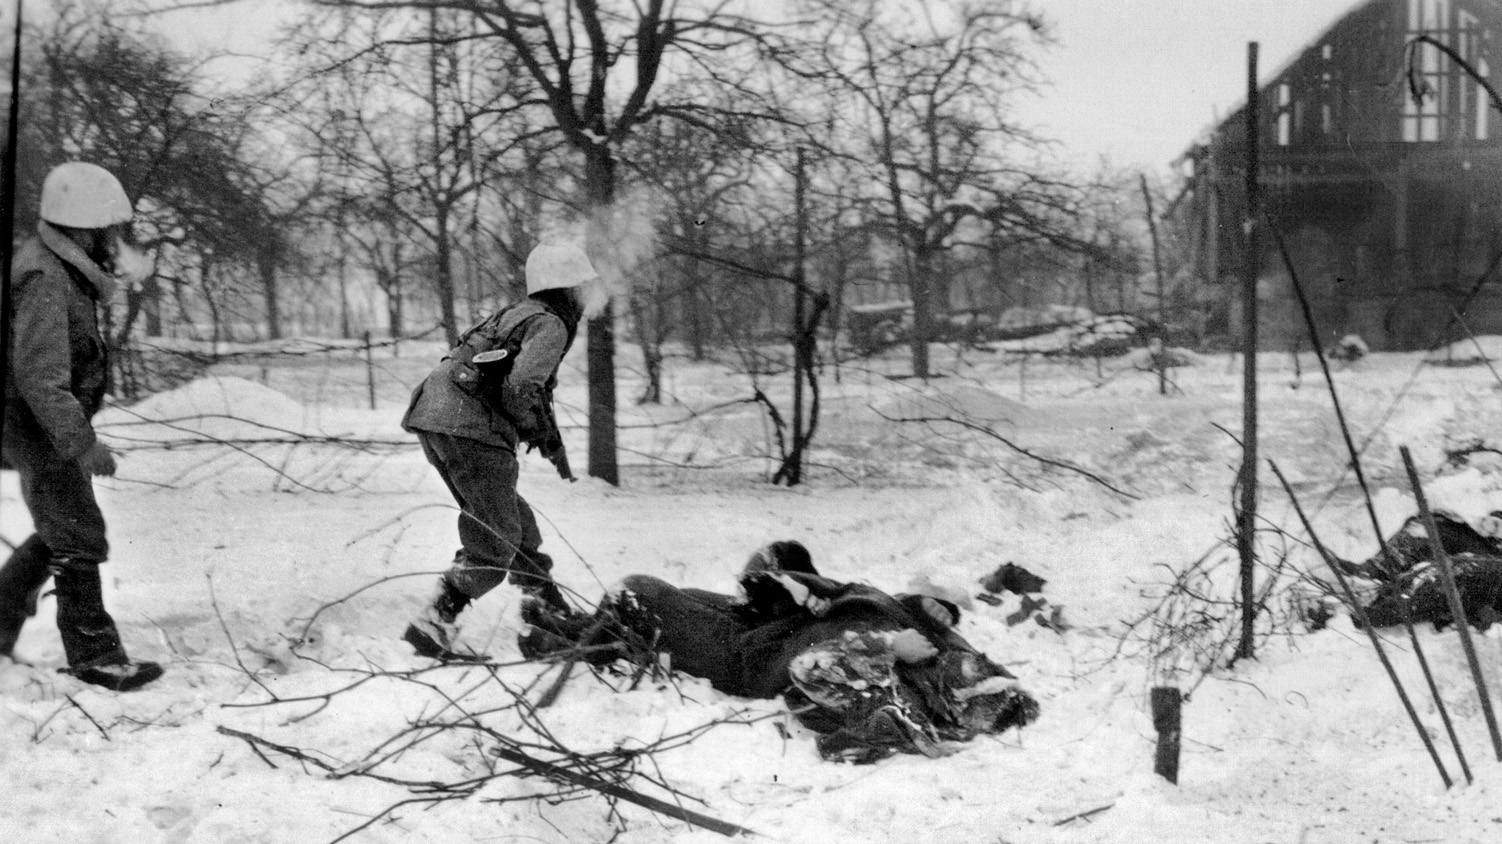 U.S. troops advance cautiously past the bodies of several dead German soldiers during combat on the outskirts of Jebsheim.